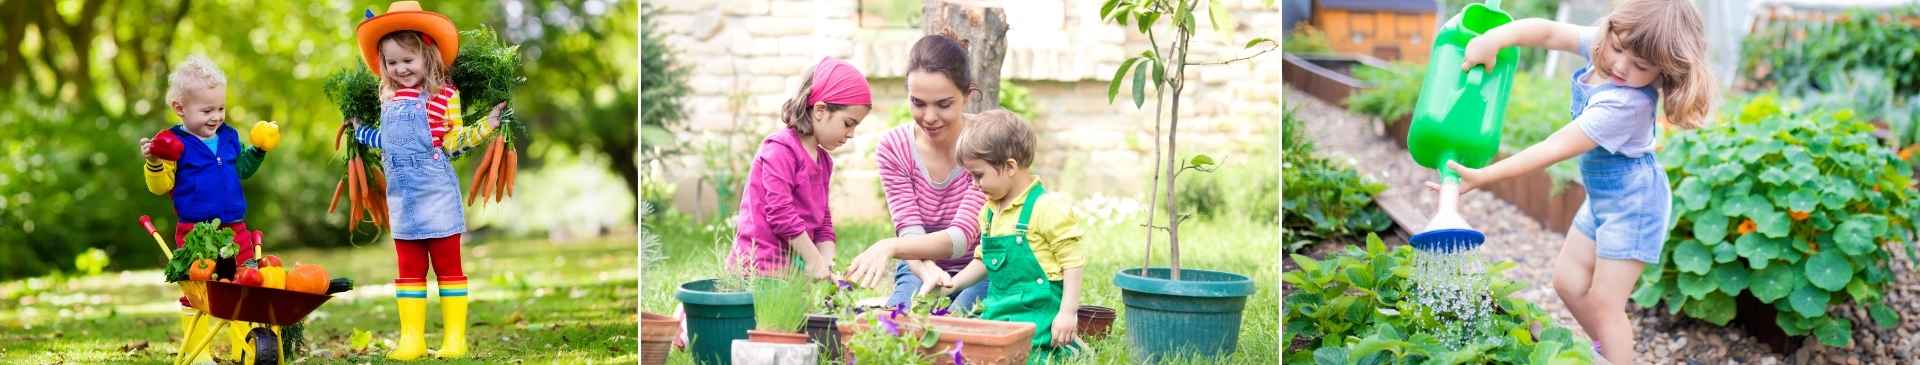 Why You Should Grow from Seed with Kids - and the Best Ways to Get Started Doing It